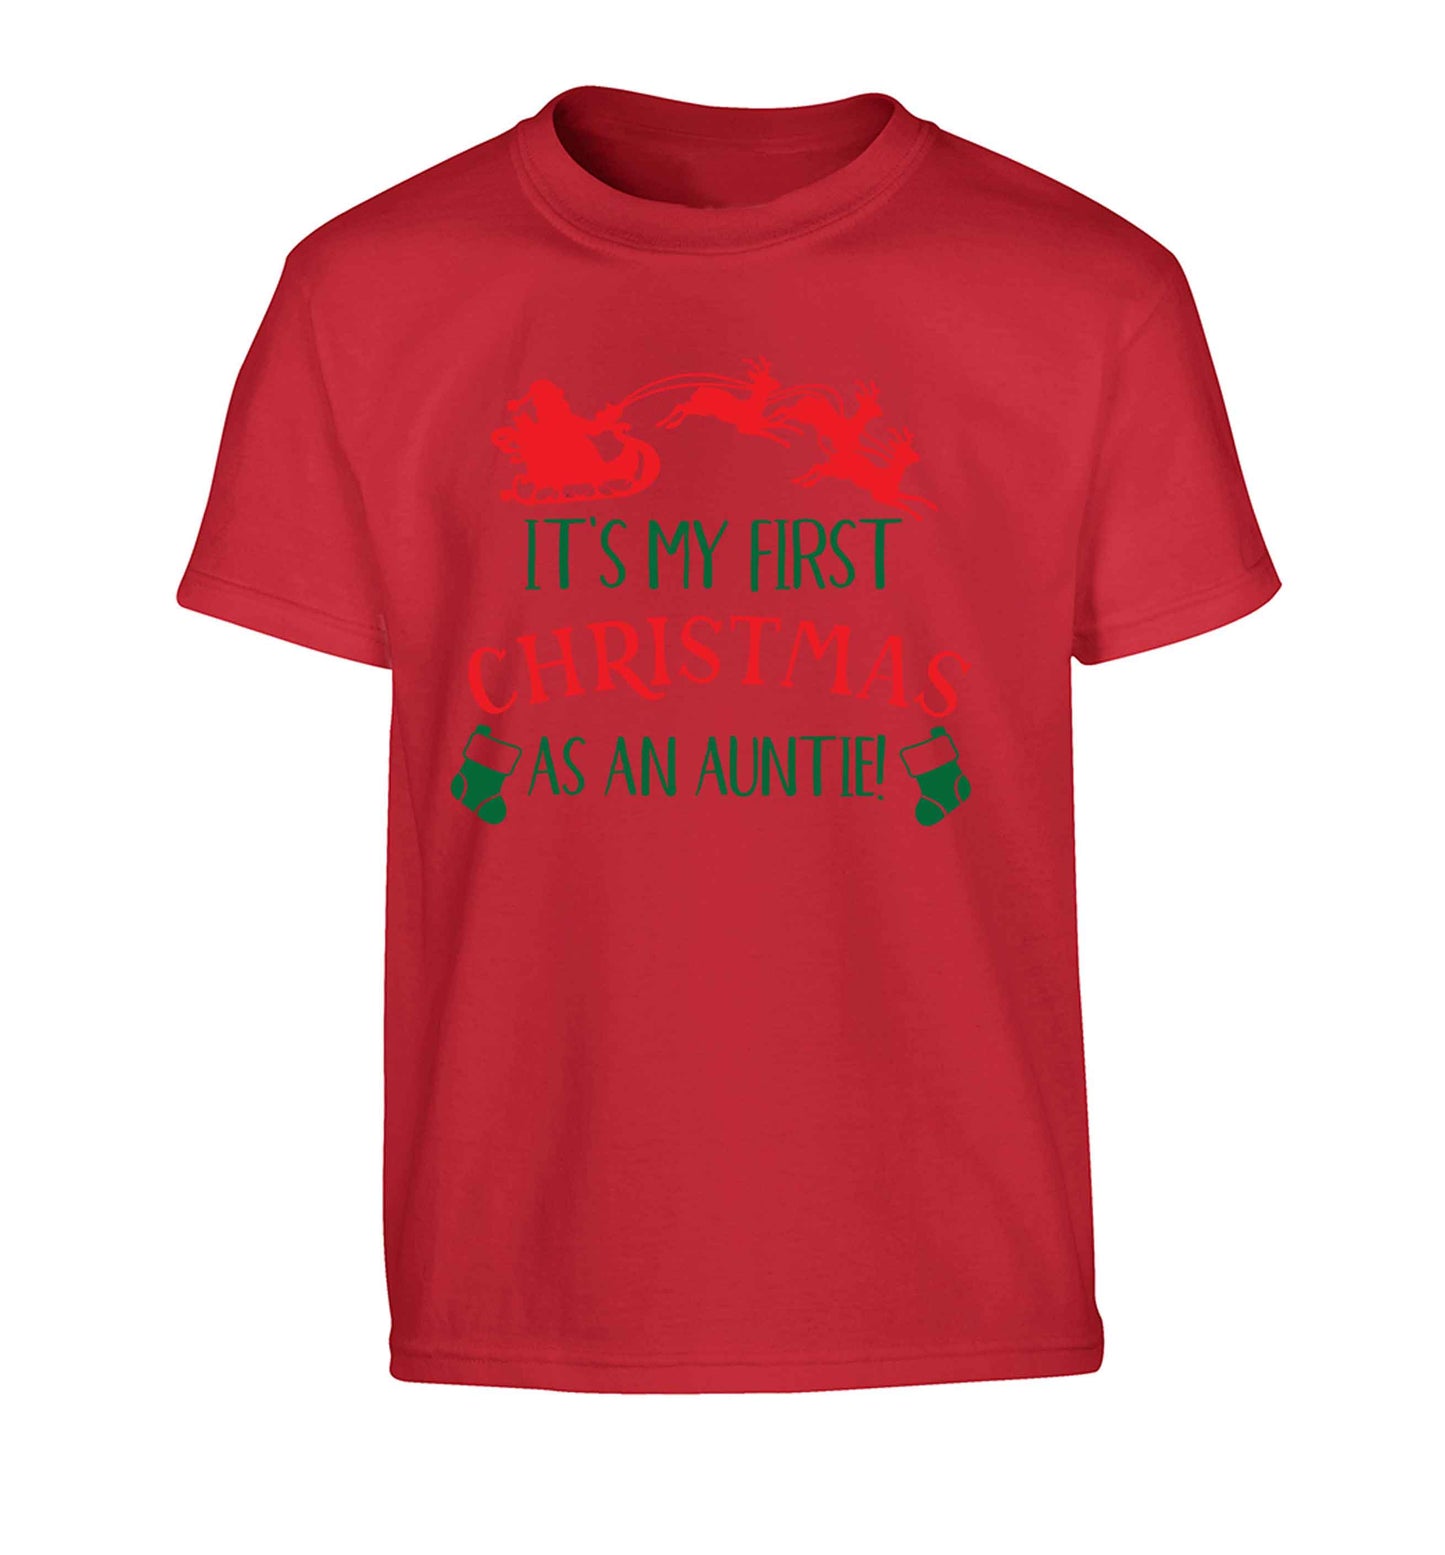 It's my first Christmas as an auntie! Children's red Tshirt 12-13 Years